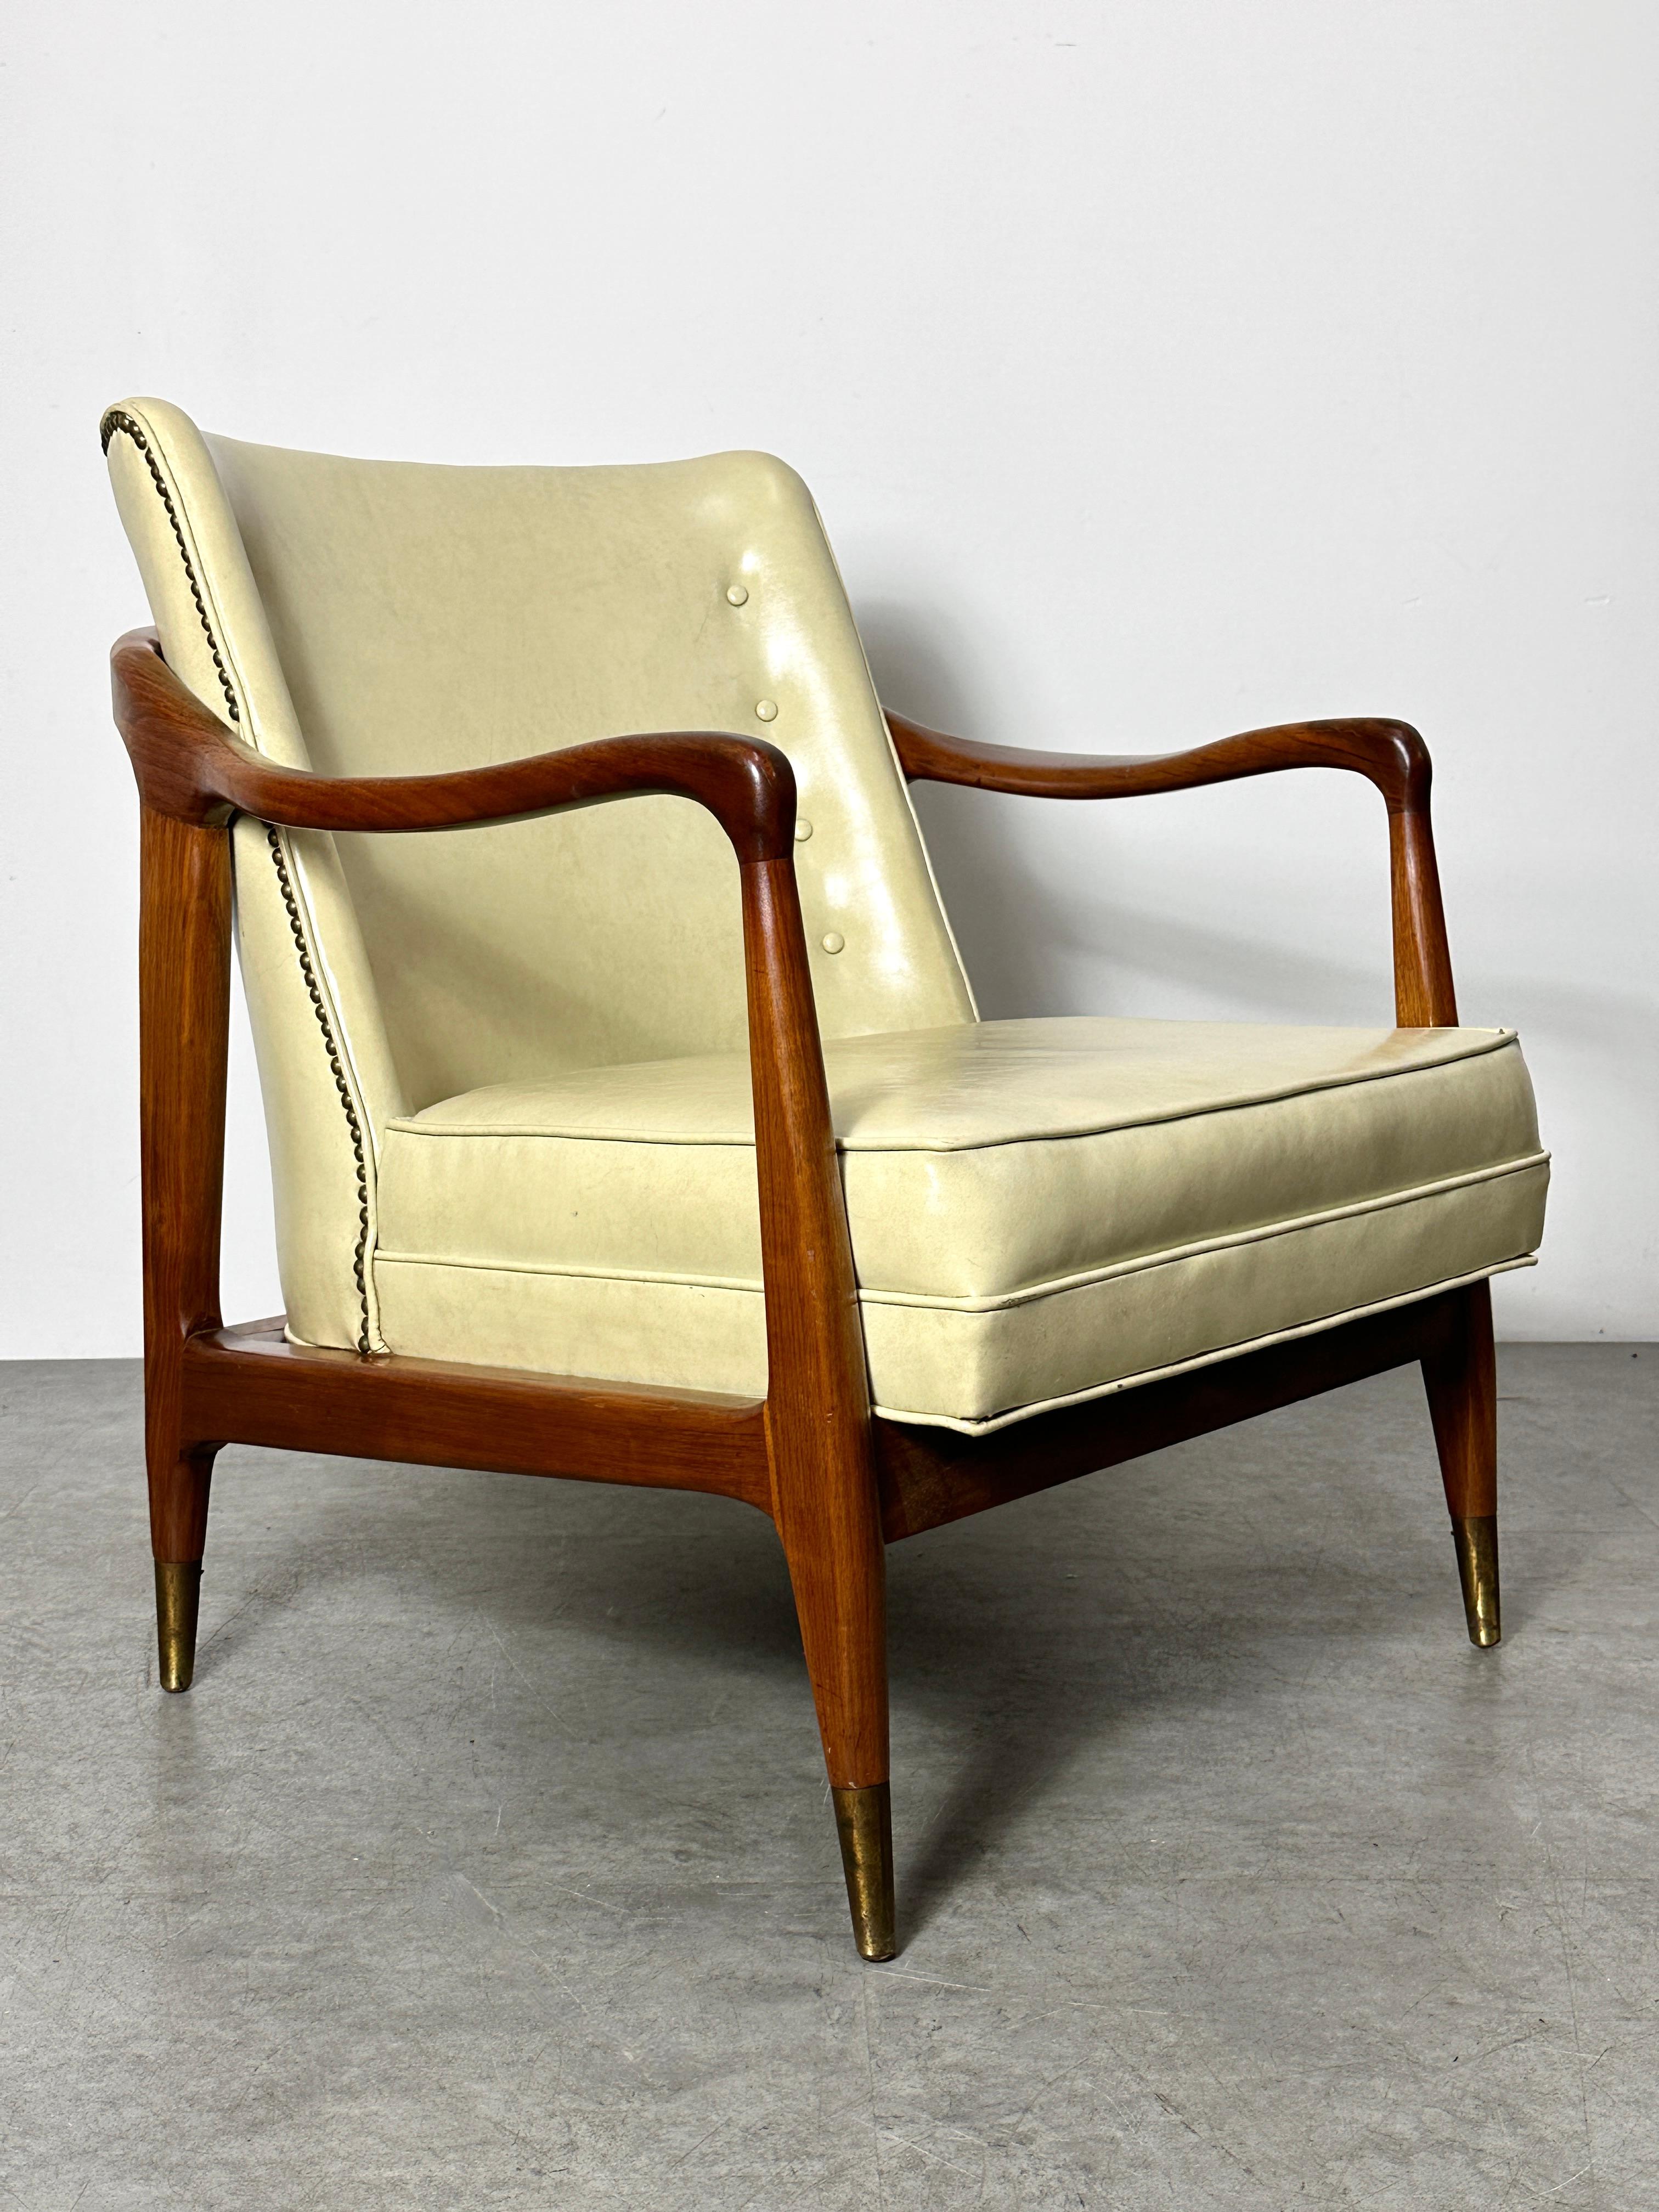 1950s lounge chair in the style of Gio Ponti
Sculptural walnut frame with brass tipped feet
Original Naugahyde upholstery in ivory with tufted back and brass nailhead accents
